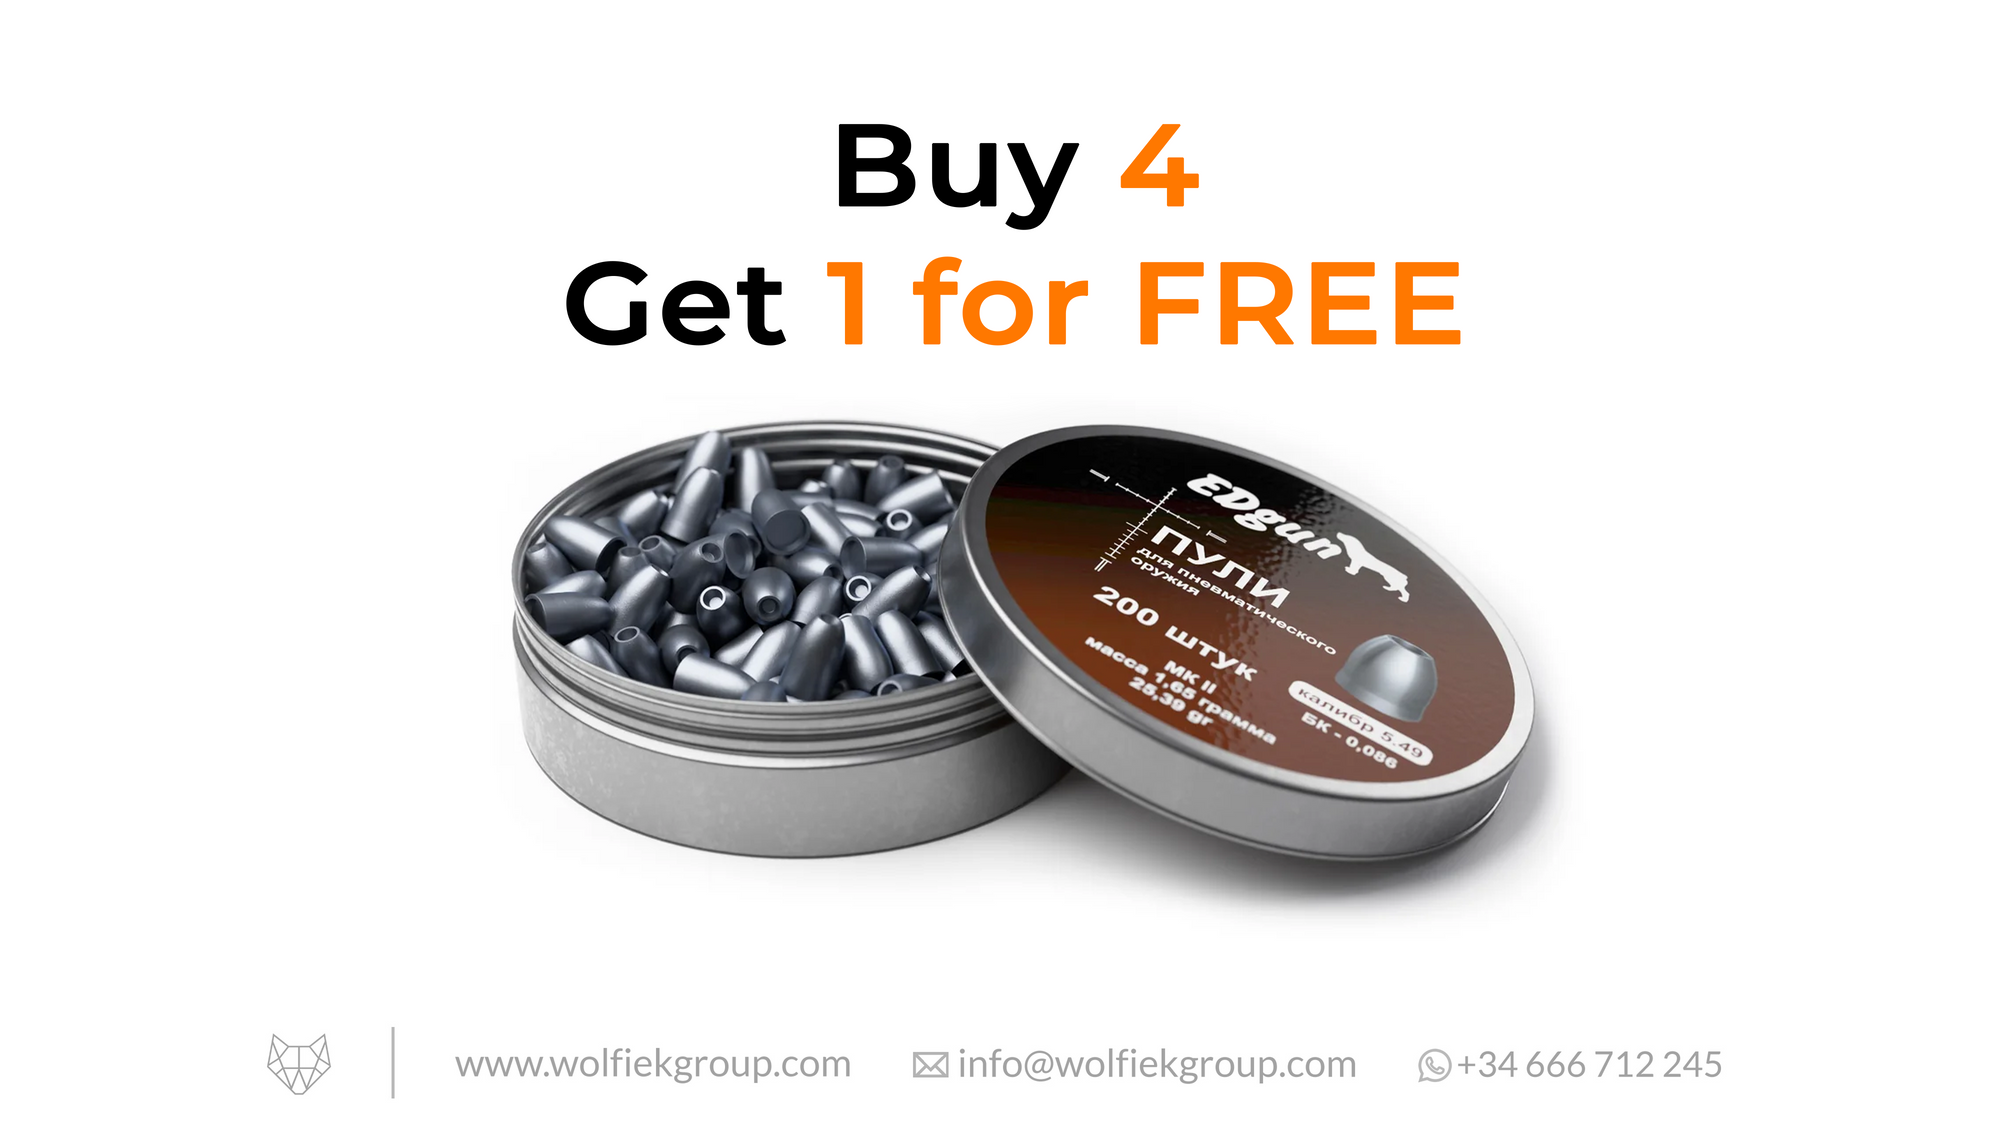 EDgun KnockOut Slugs Cal .216 (5,49mm) Weight 1,65g (25,40gr) MKII with text buy 4 get 1 for free